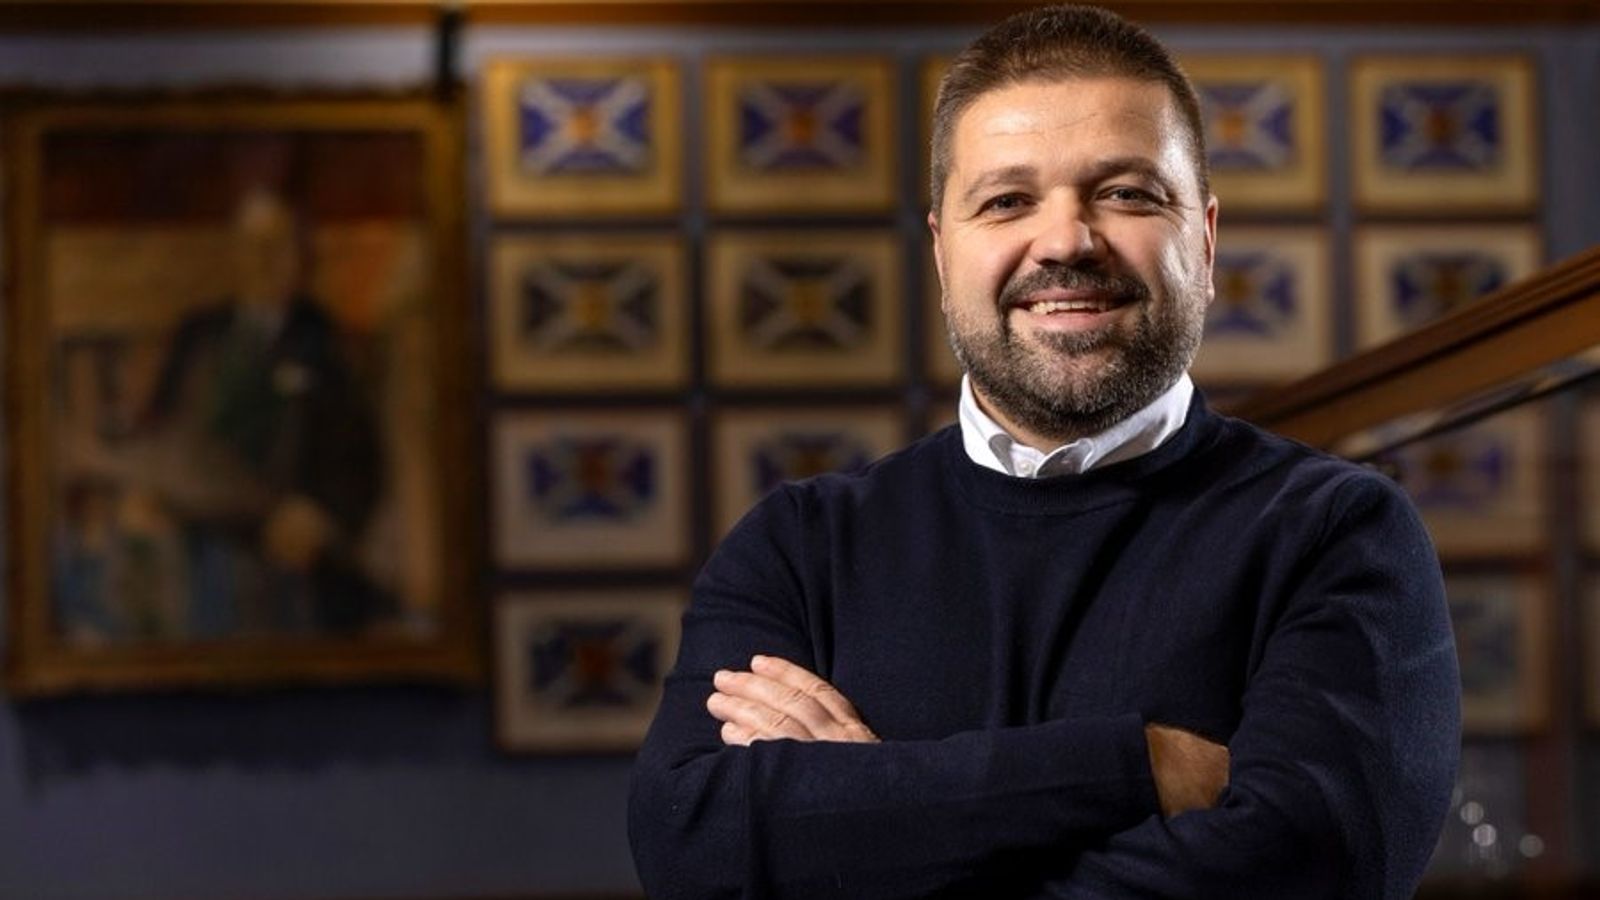 Rangers have appointed Nils Koppen as Director of Football Recruitment to complete its men's football board (Credit: Rangers)